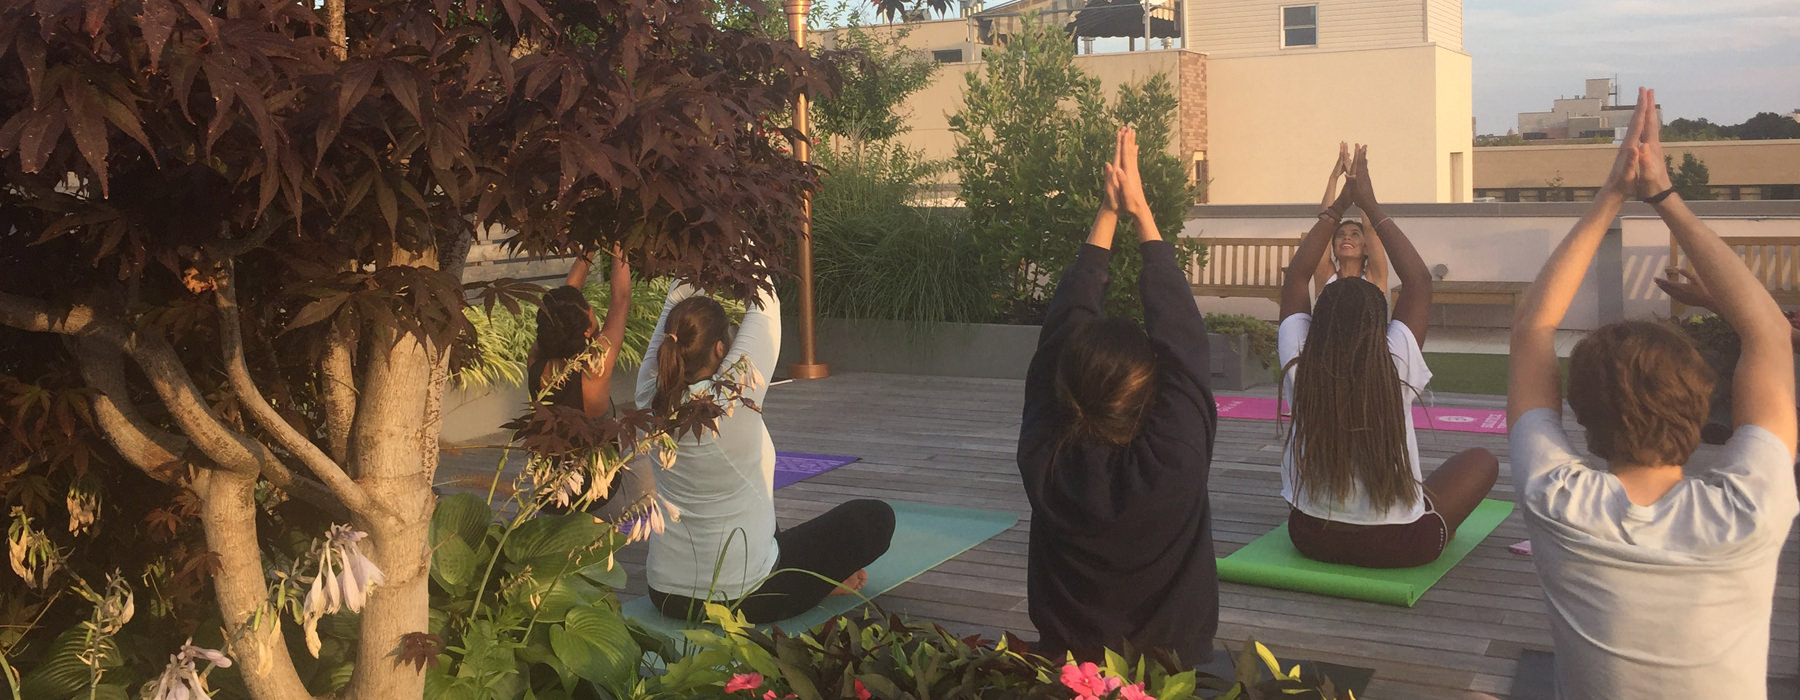 Roof-top yoga with people stretching praying hands to the air.